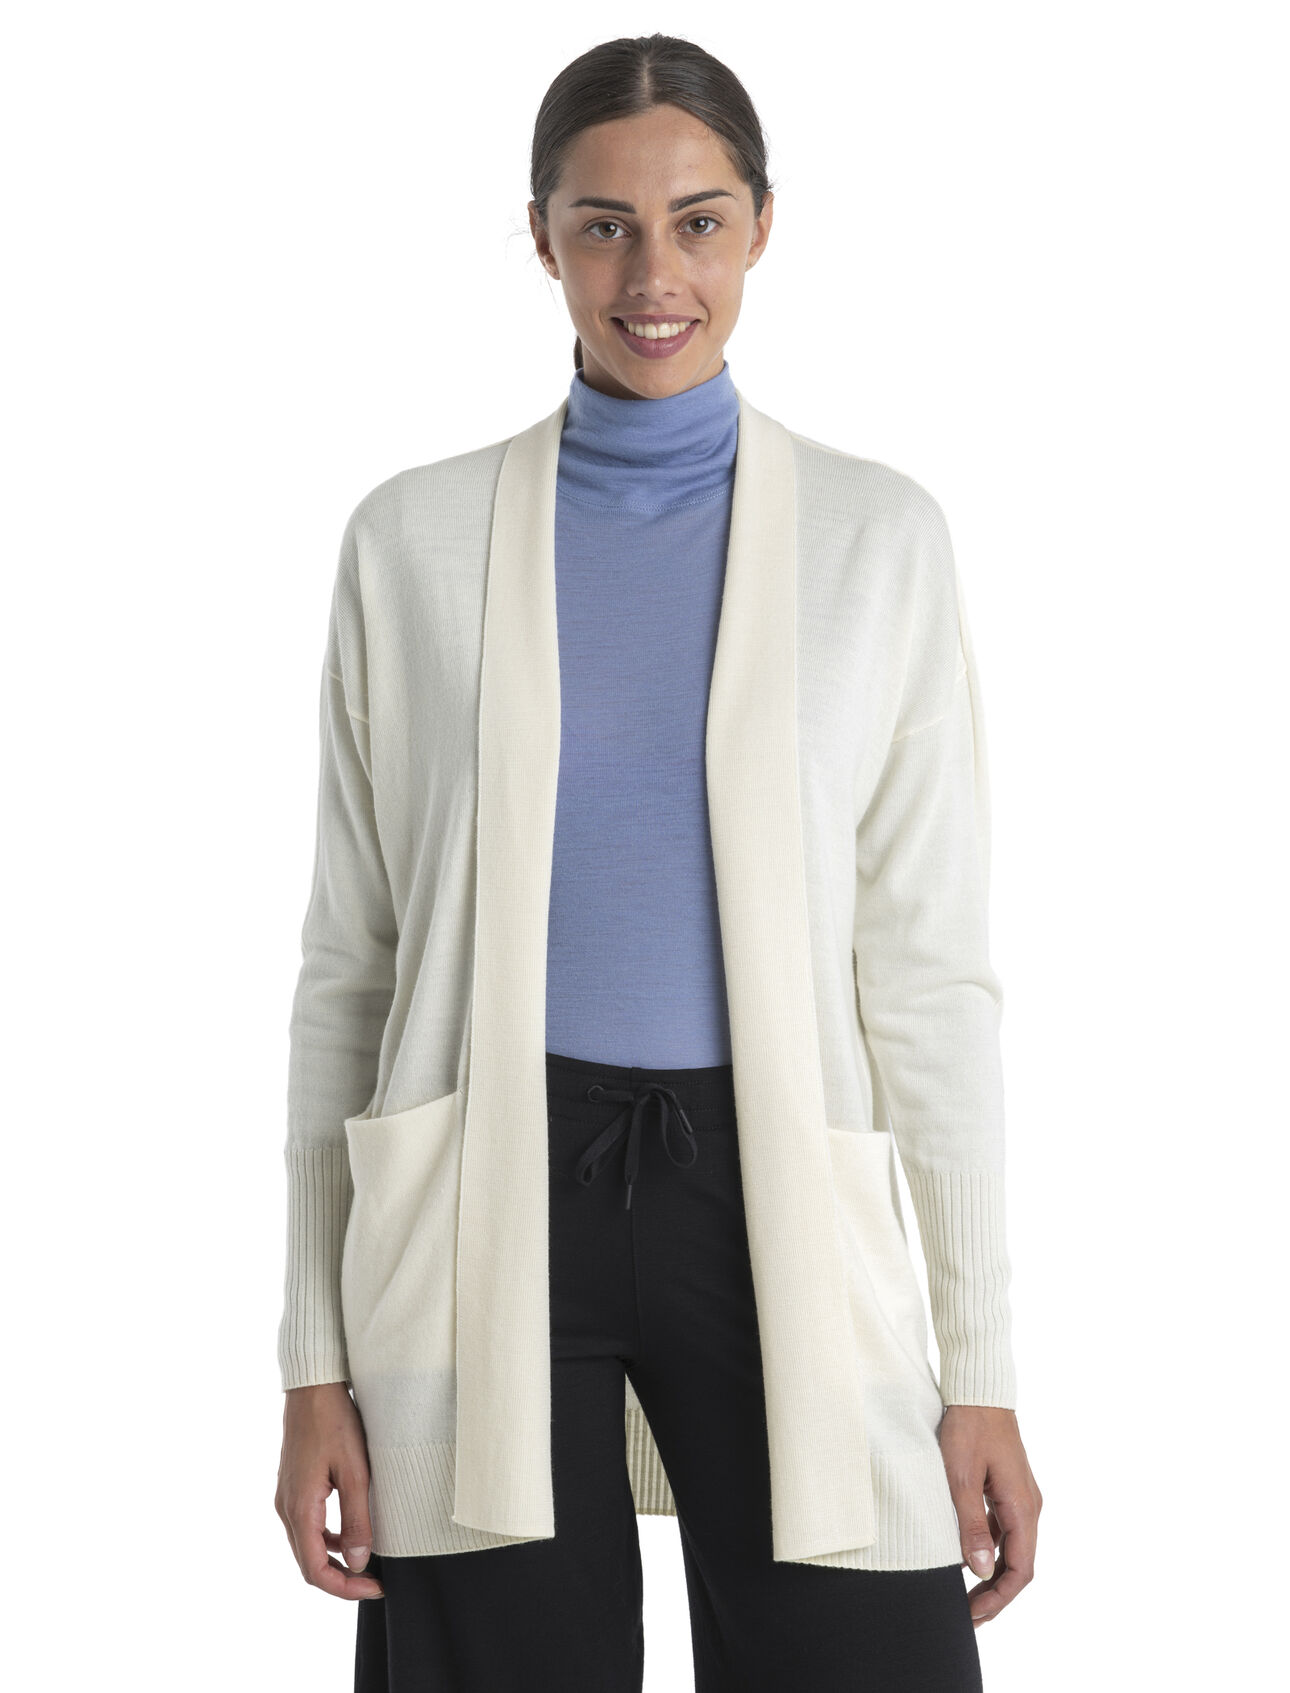 Womens Merino Iseo Long Cardigan Sweater A casual and versatile layering piece that easily transitions from season to season, the Iseo Long Cardigan Sweater combines ultra-soft, 100% merino fibres with a stylish, modern silhouette.